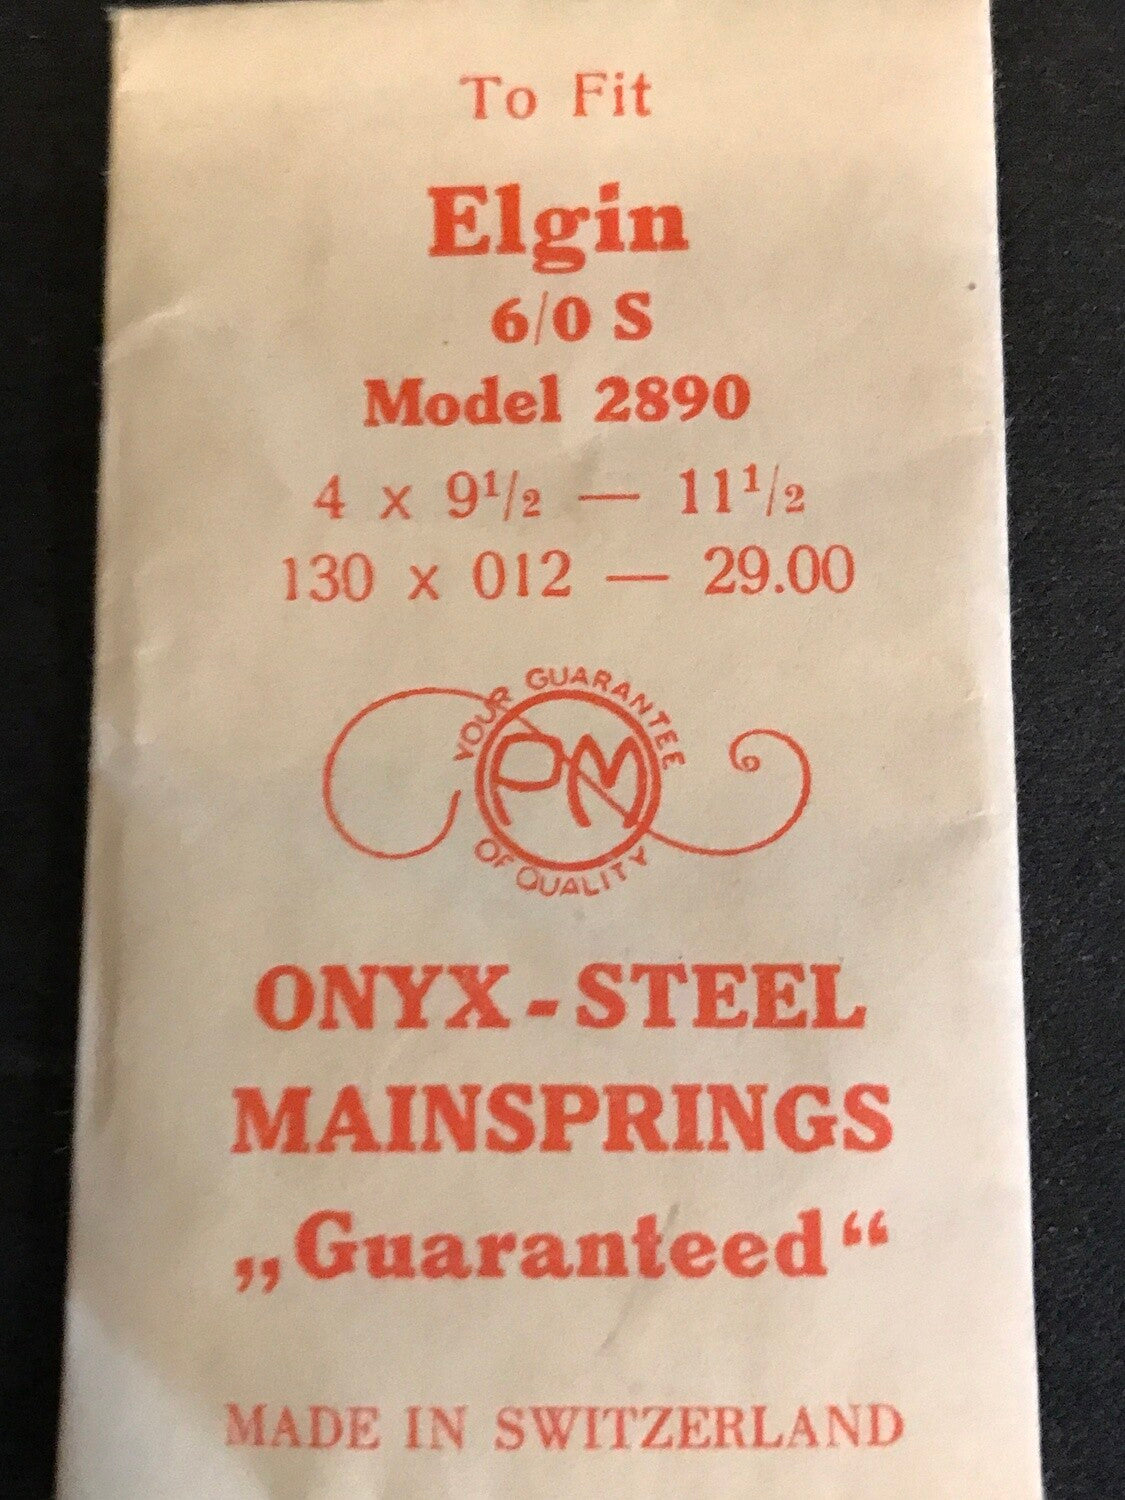 PM Mainspring for Elgin 6/0s No. 2890 - ONYX Steel